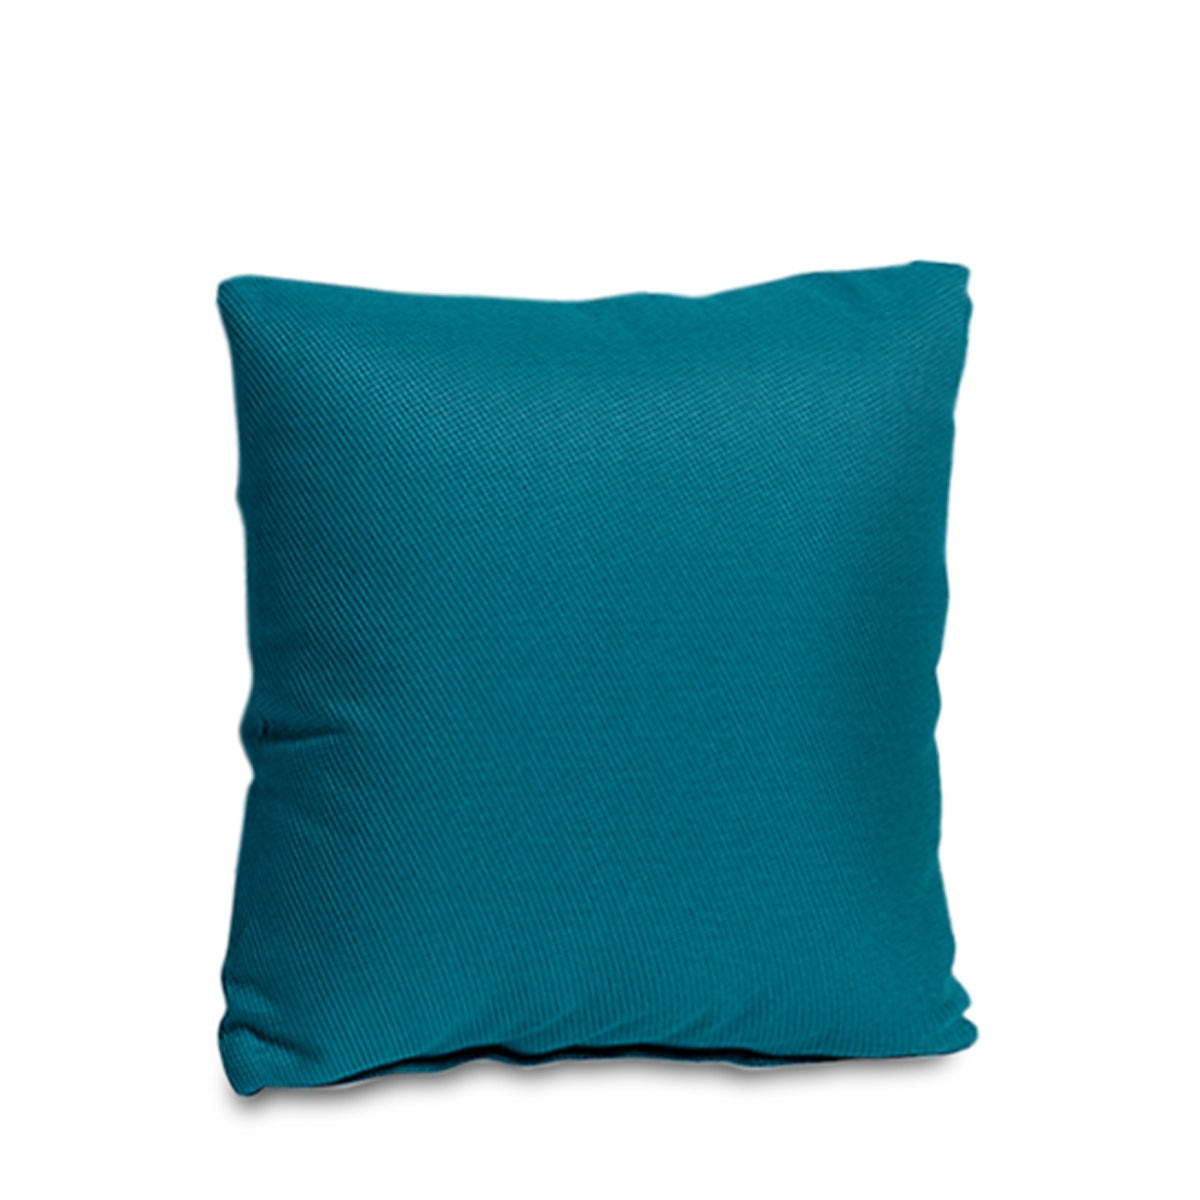 that's living outdoor medium decorative outdoor pillows  teal outdoor cushions 